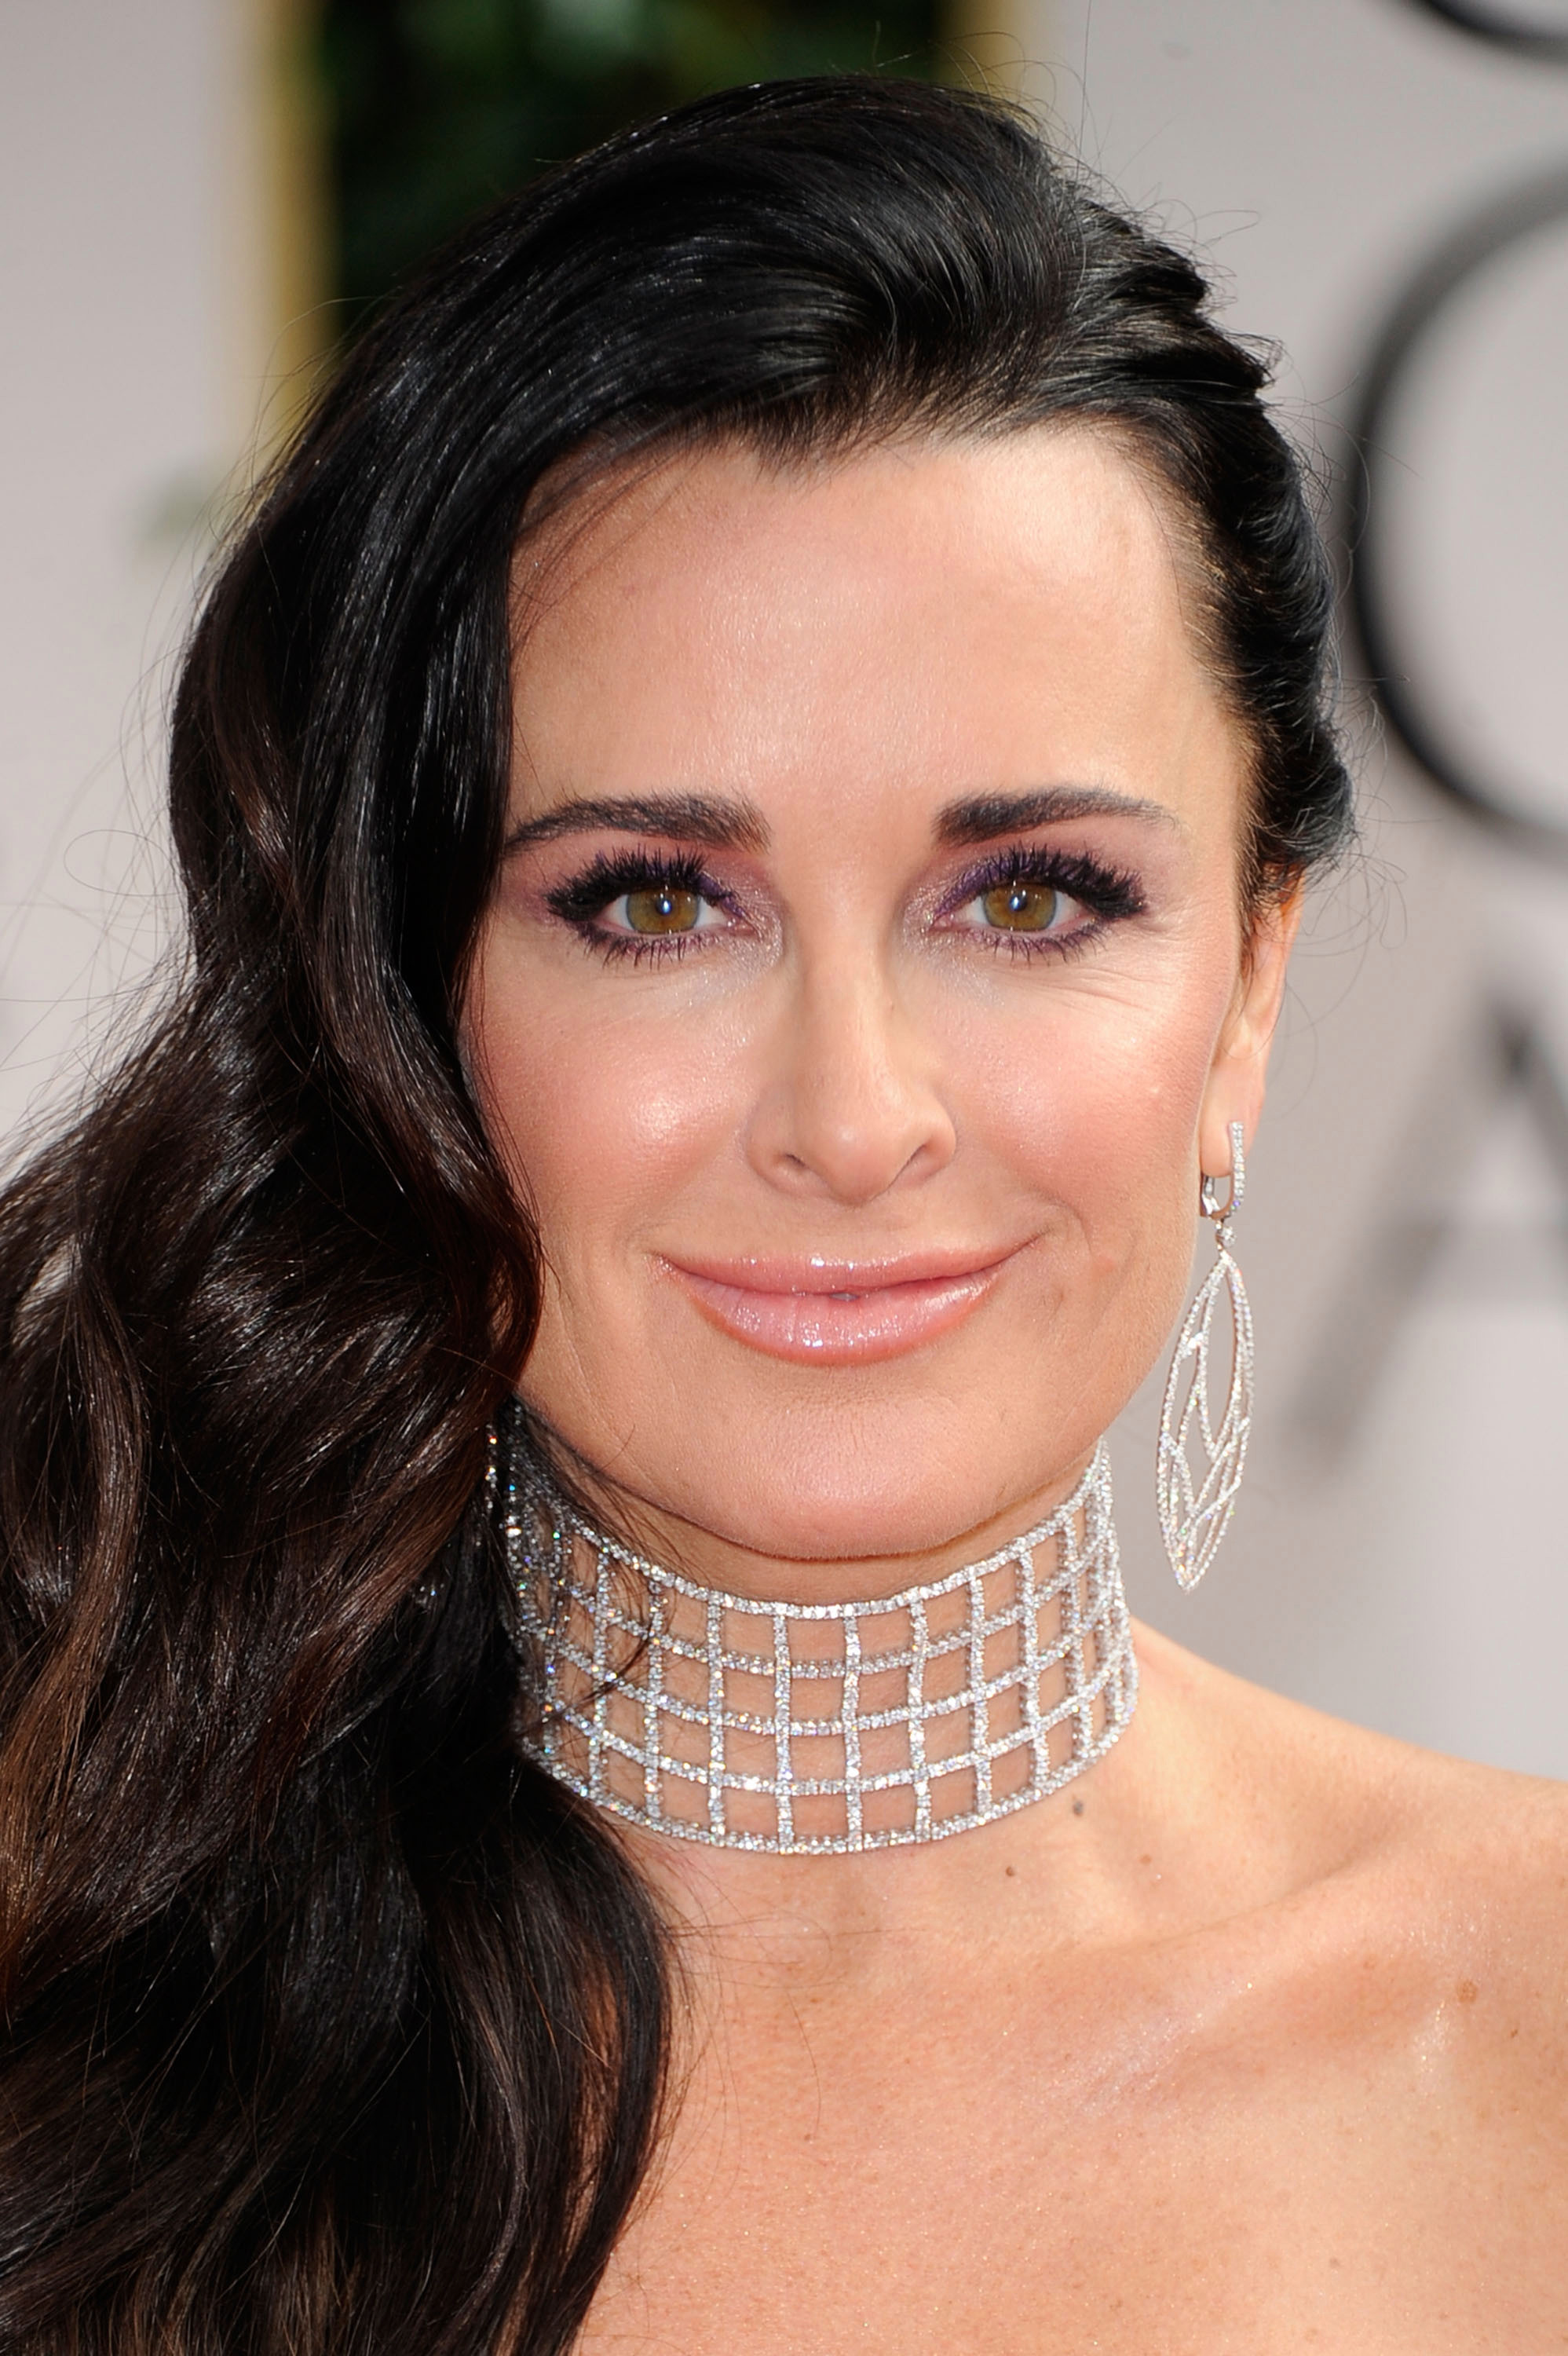 Kyle Richards, then and now: The 'RHOBH' star’s changing face in photos...